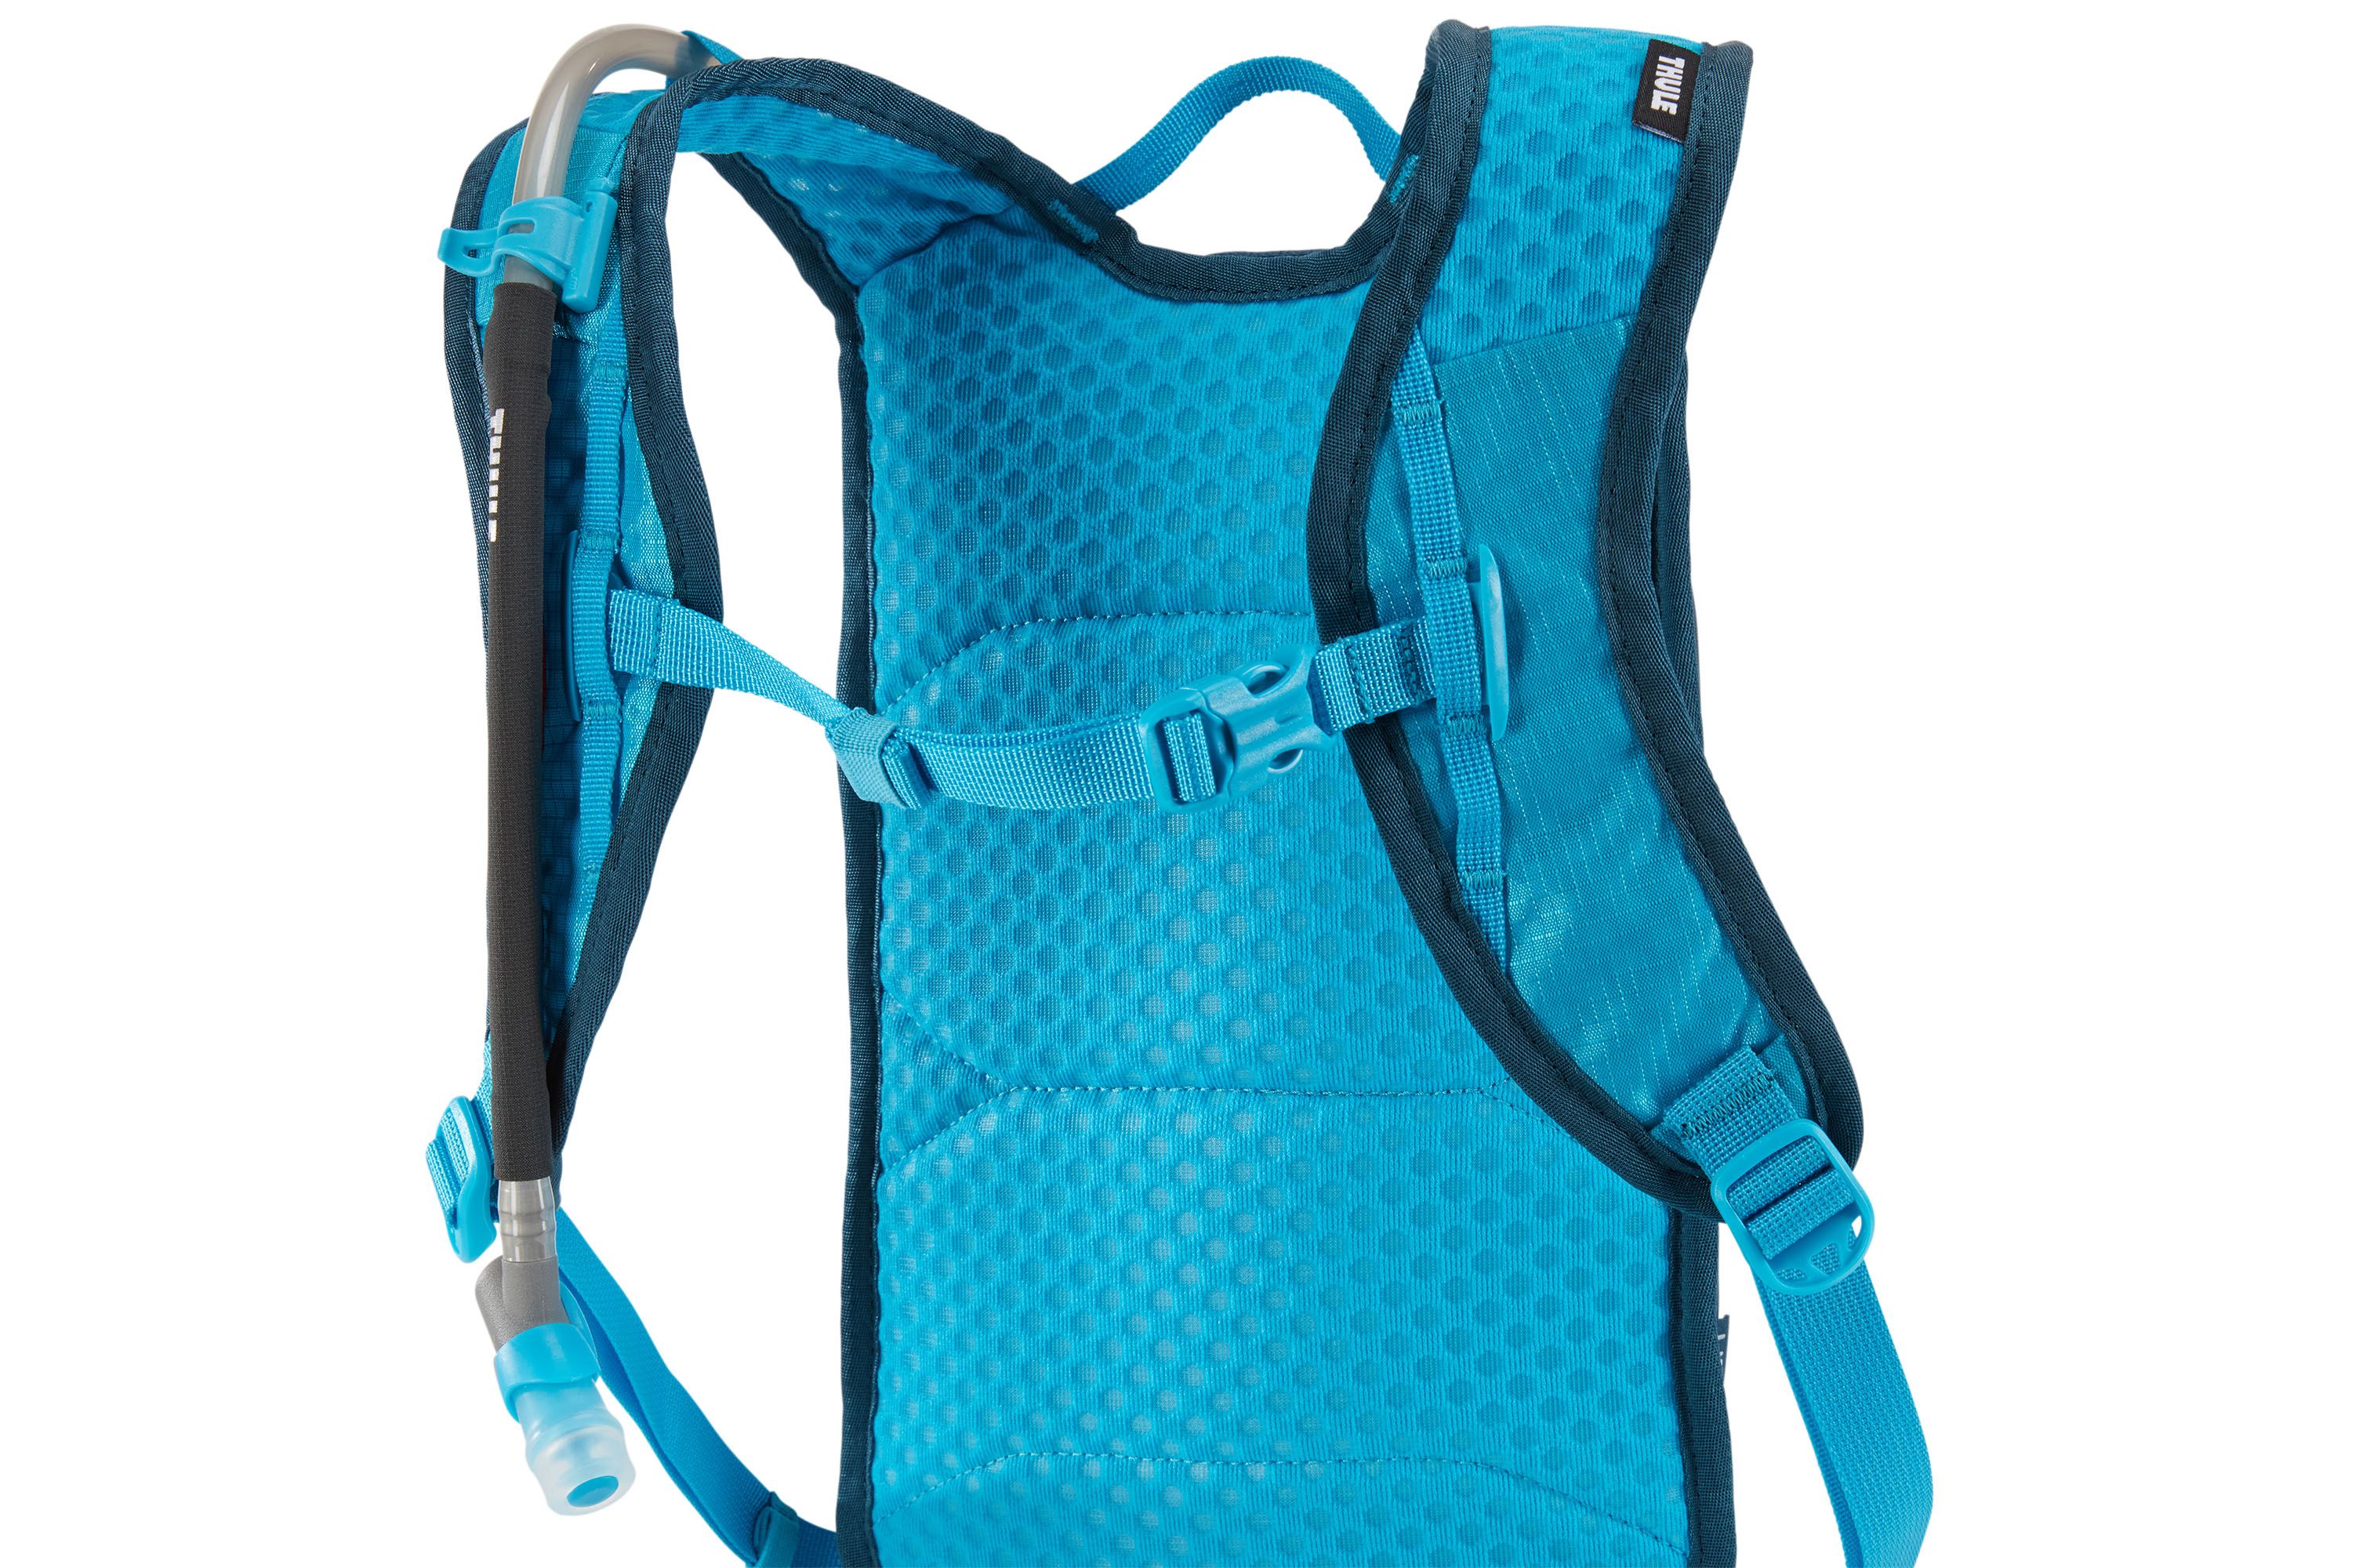 Spacer mesh backpanel of Thule UpTake 6L hydration pack